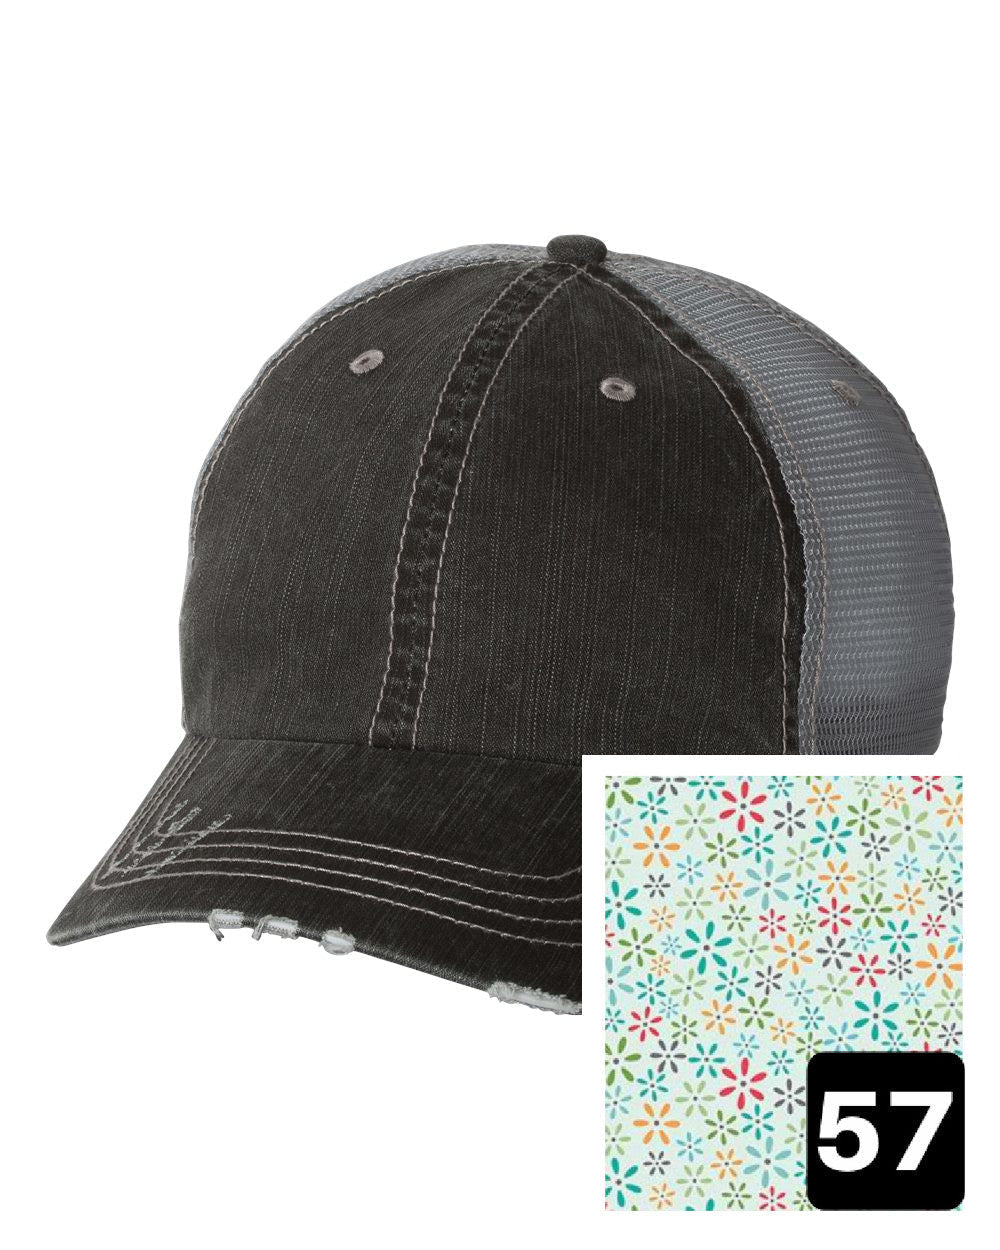 gray distressed trucker hat with white daisy on yellow fabric state of Rhode Island